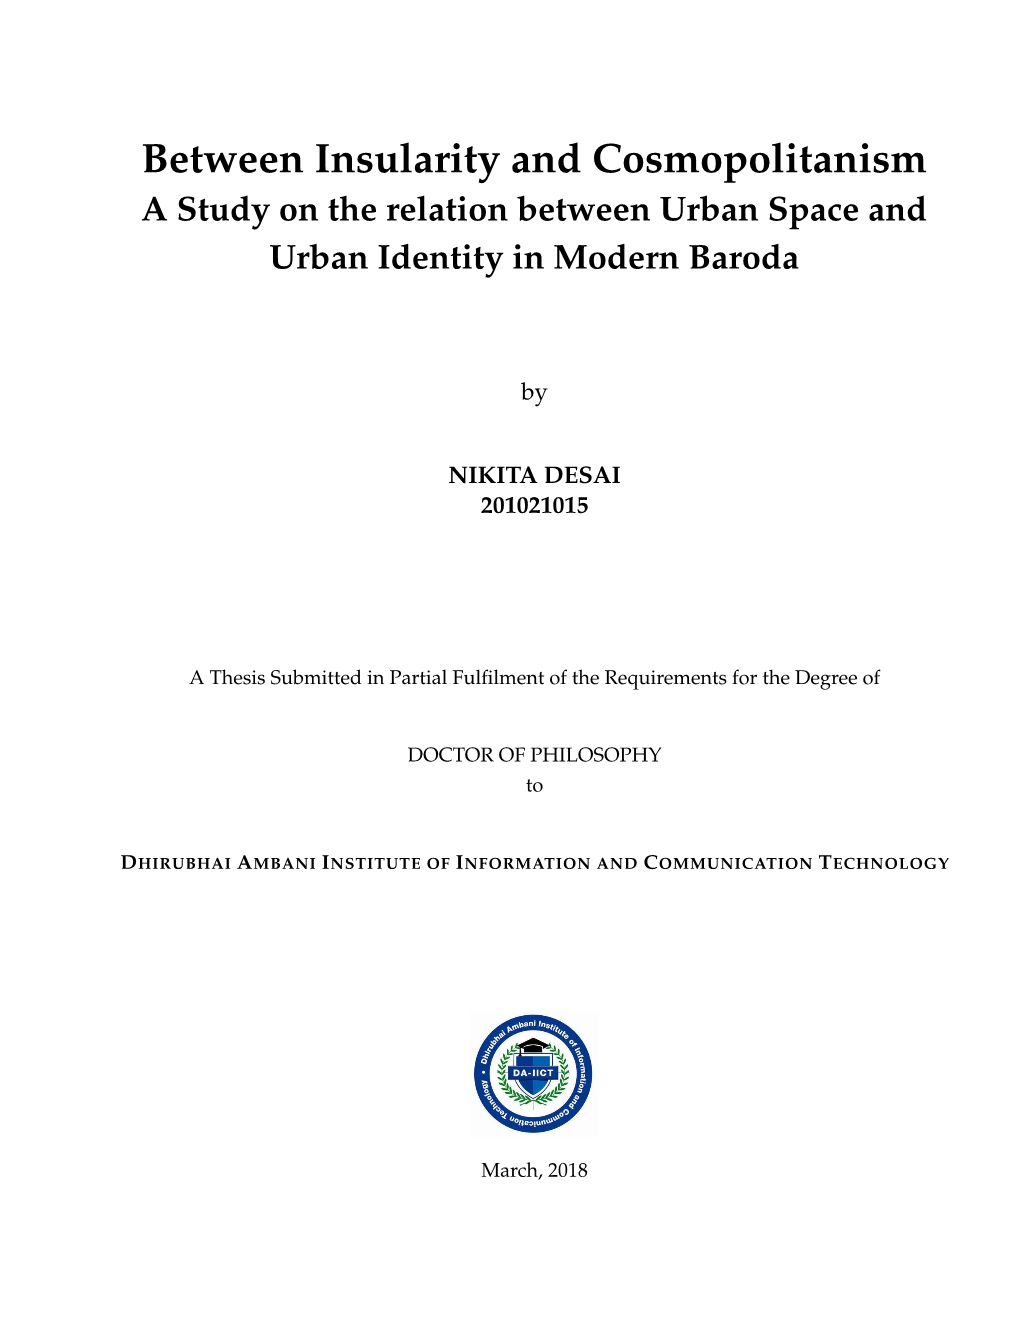 Between Insularity and Cosmopolitanism a Study on the Relation Between Urban Space and Urban Identity in Modern Baroda